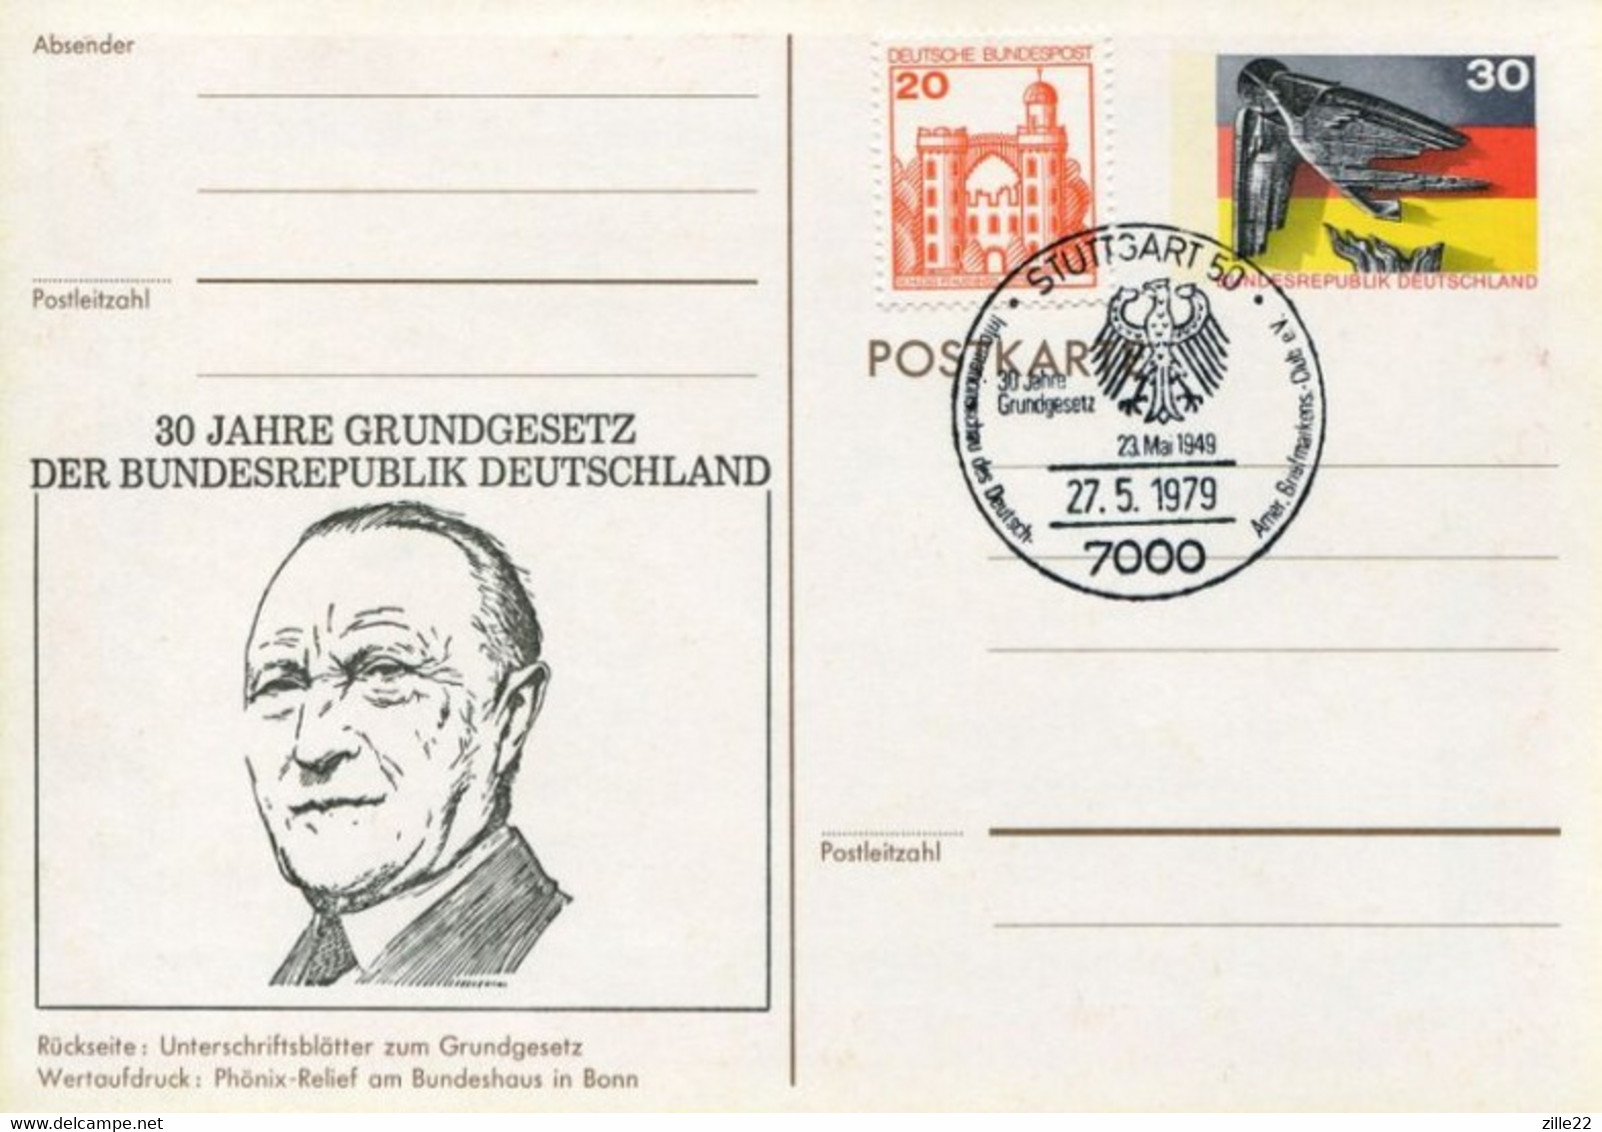 Germany Deutschland Postal Stationery - Private Card - Dove Design - 30th BRD Anniversary - Private Postcards - Used